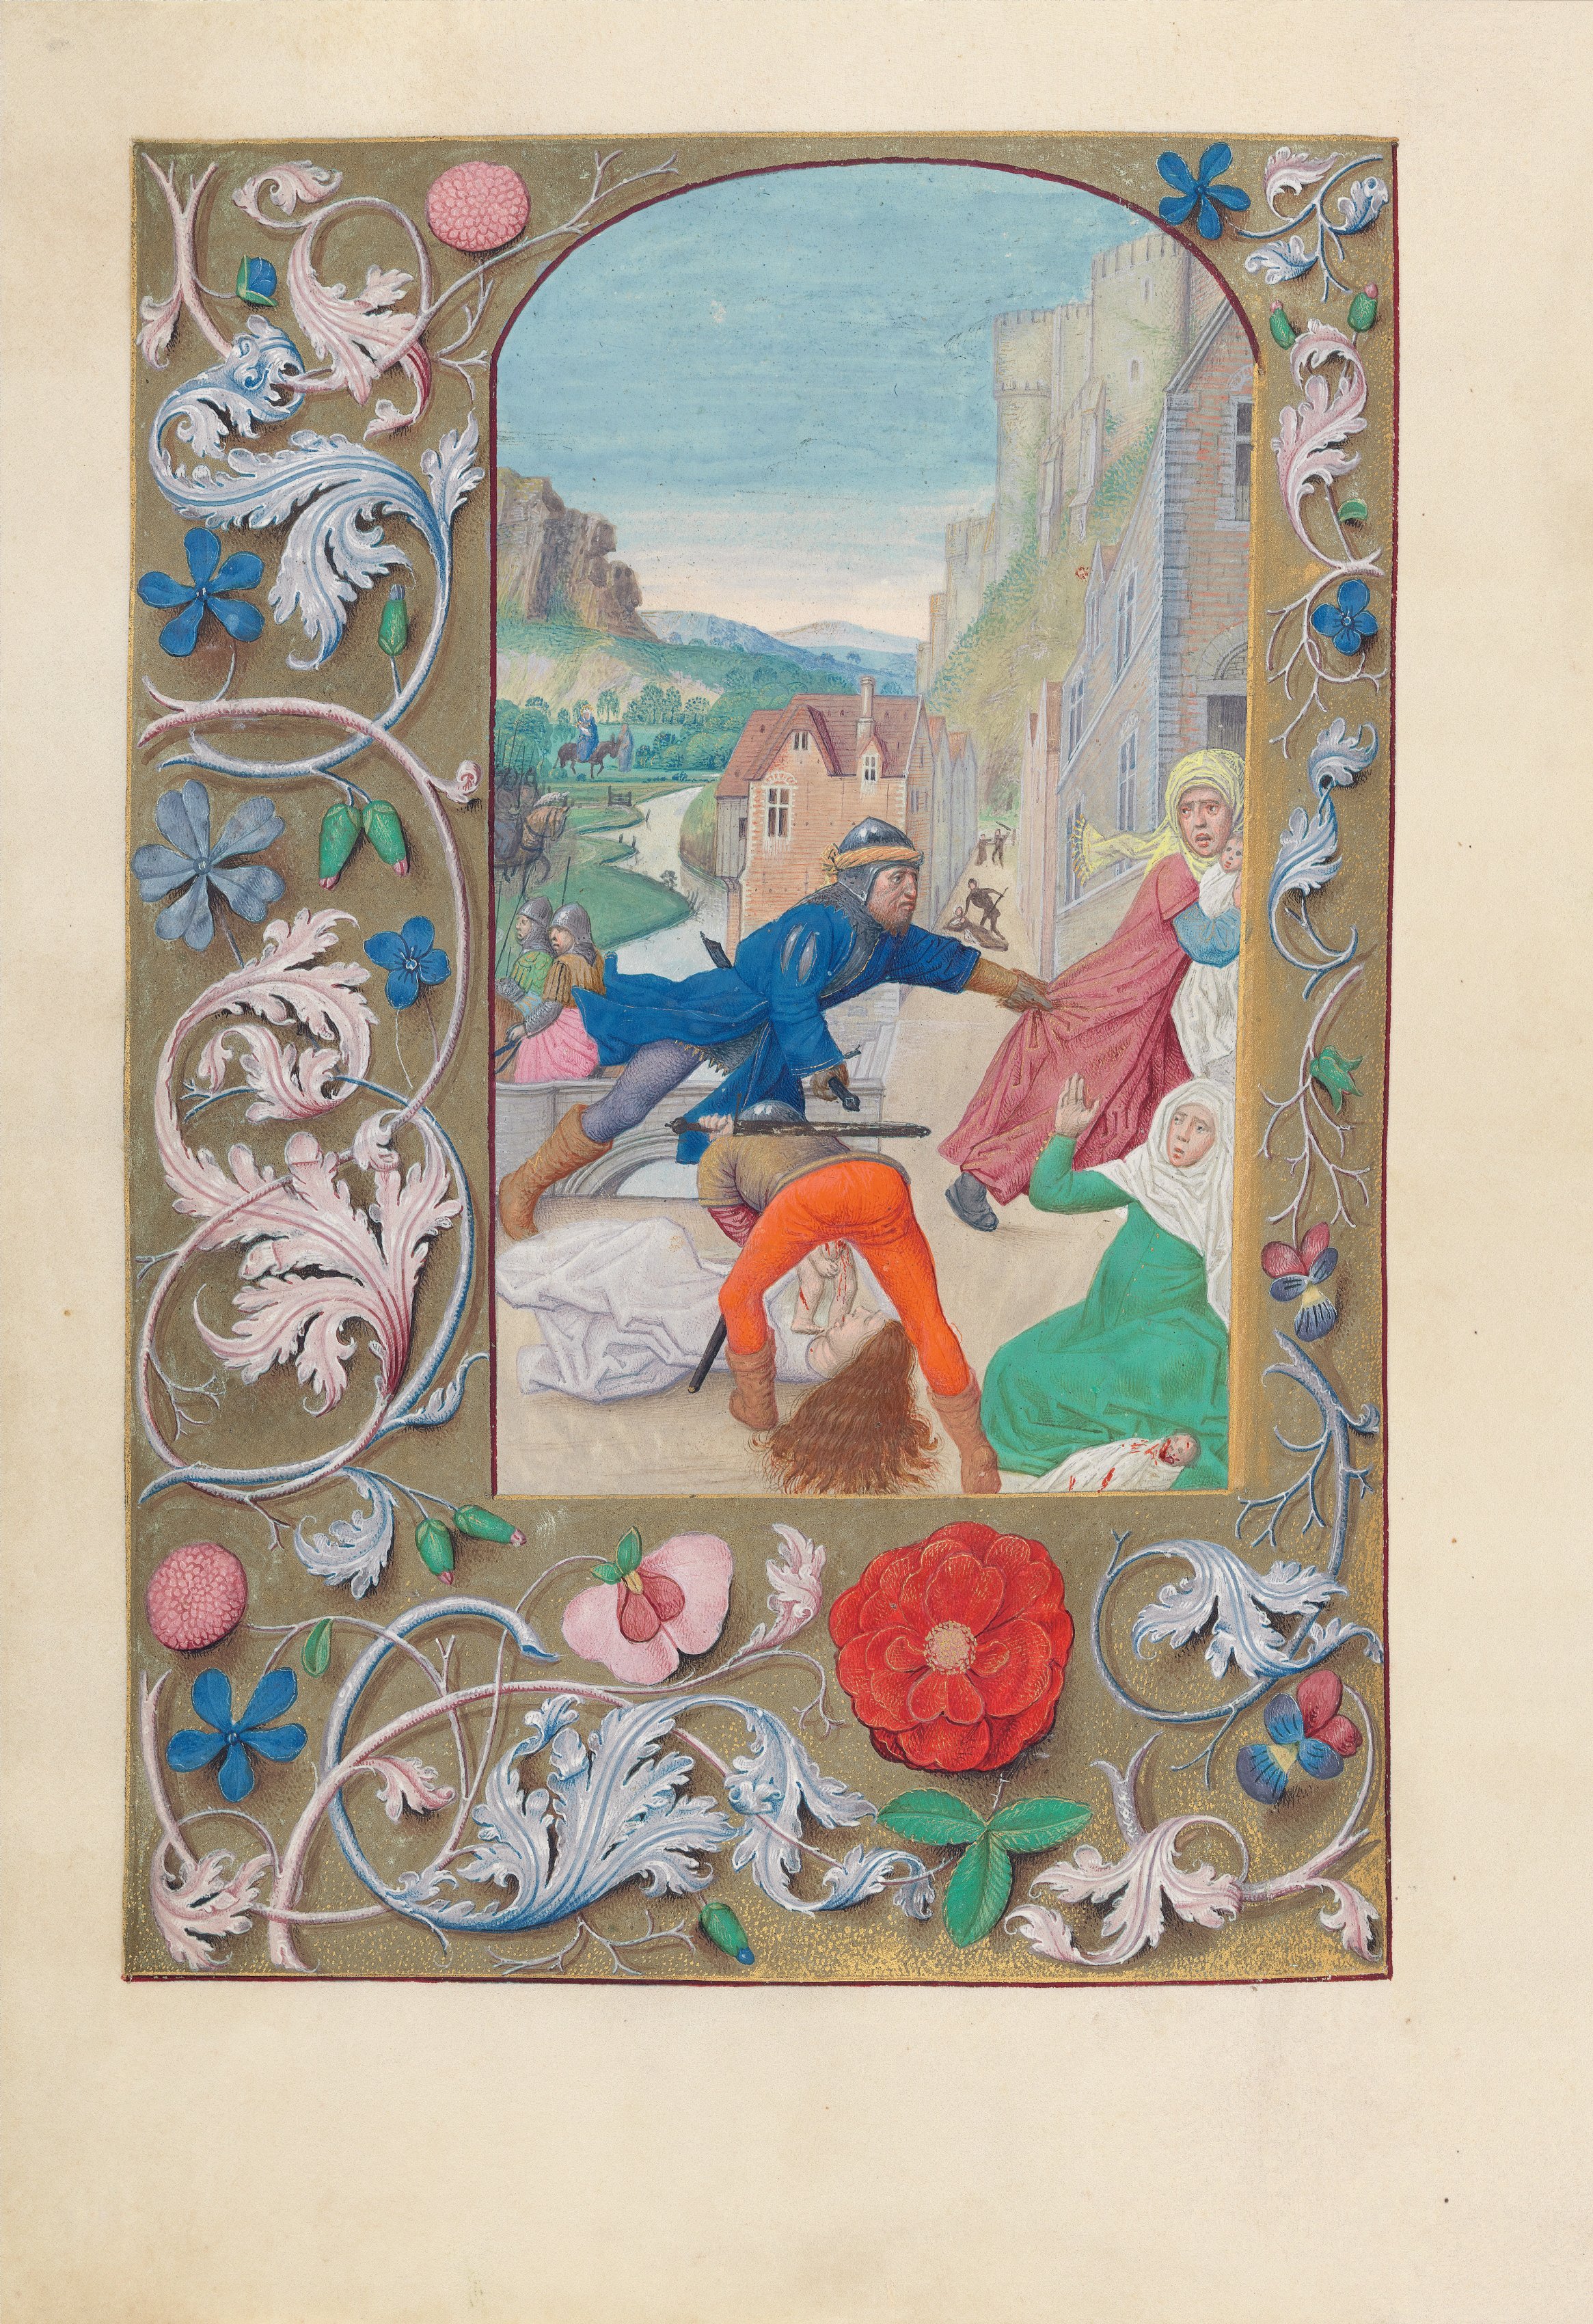 Hours of Queen Isabella the Catholic, Queen of Spain:  Fol. 146v, Massacre of the Innocents and Flight into Egypt